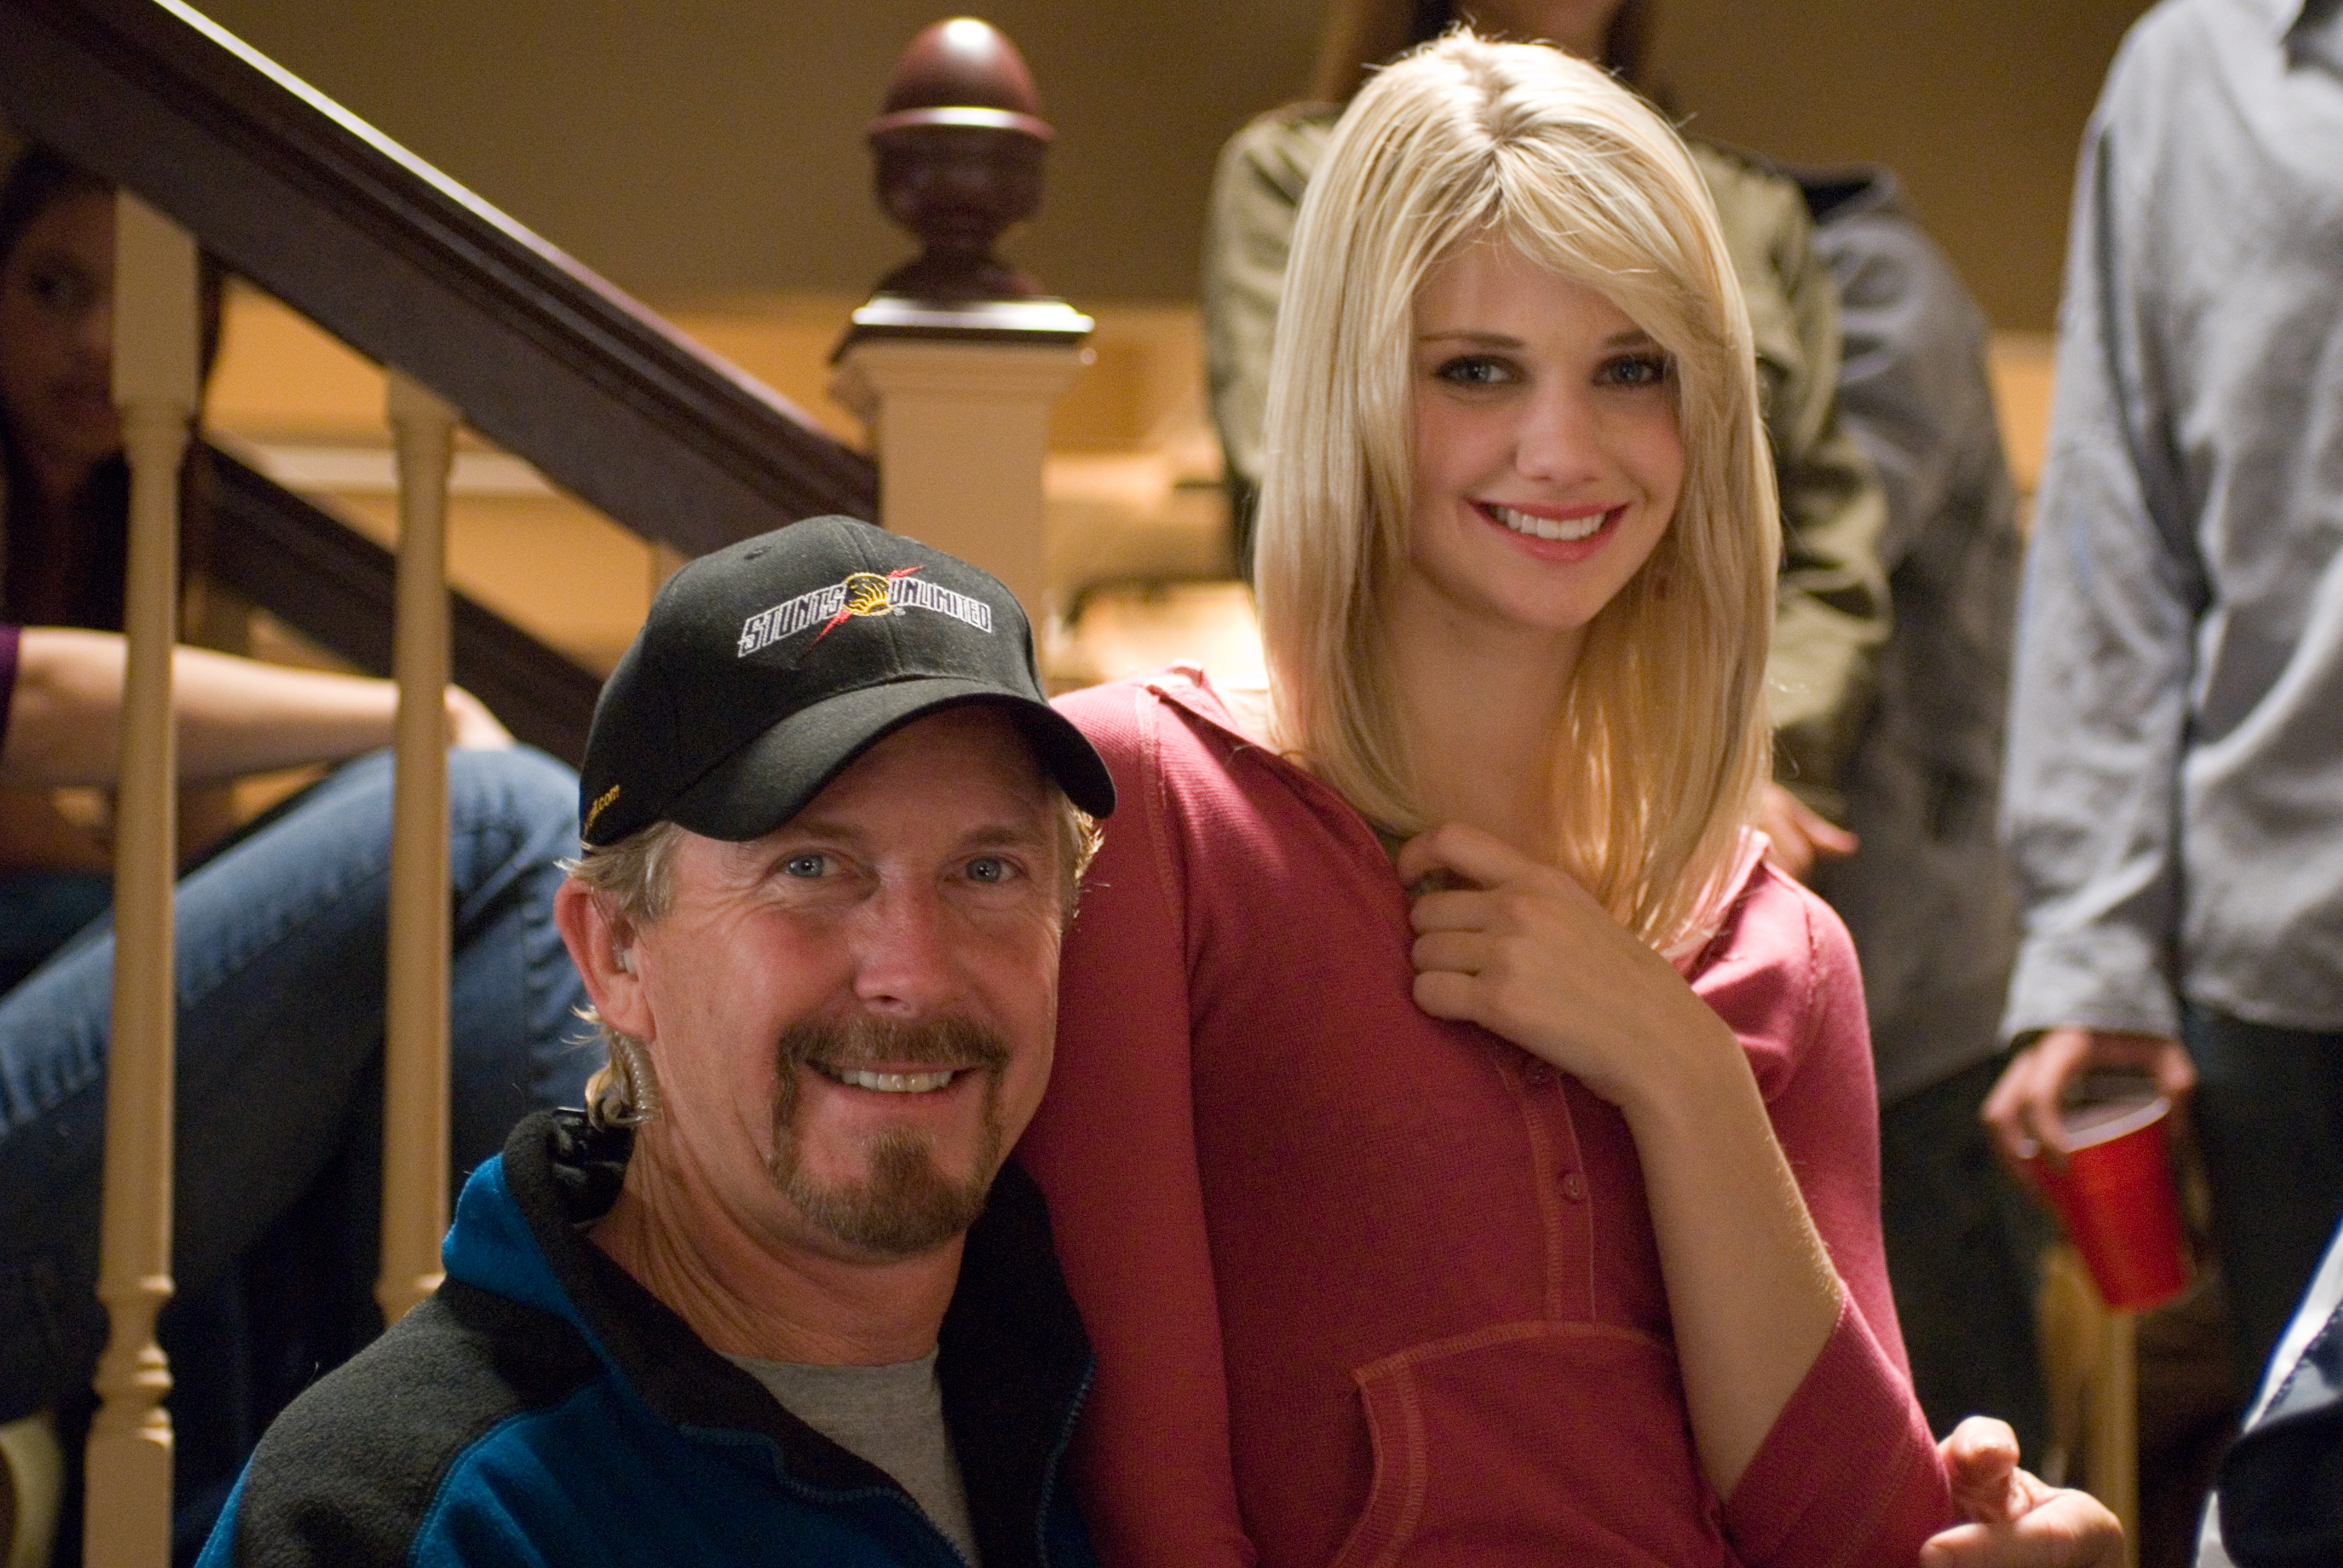 Jack Gill with daughter, Katie Gill on the set of Drillbit Taylor